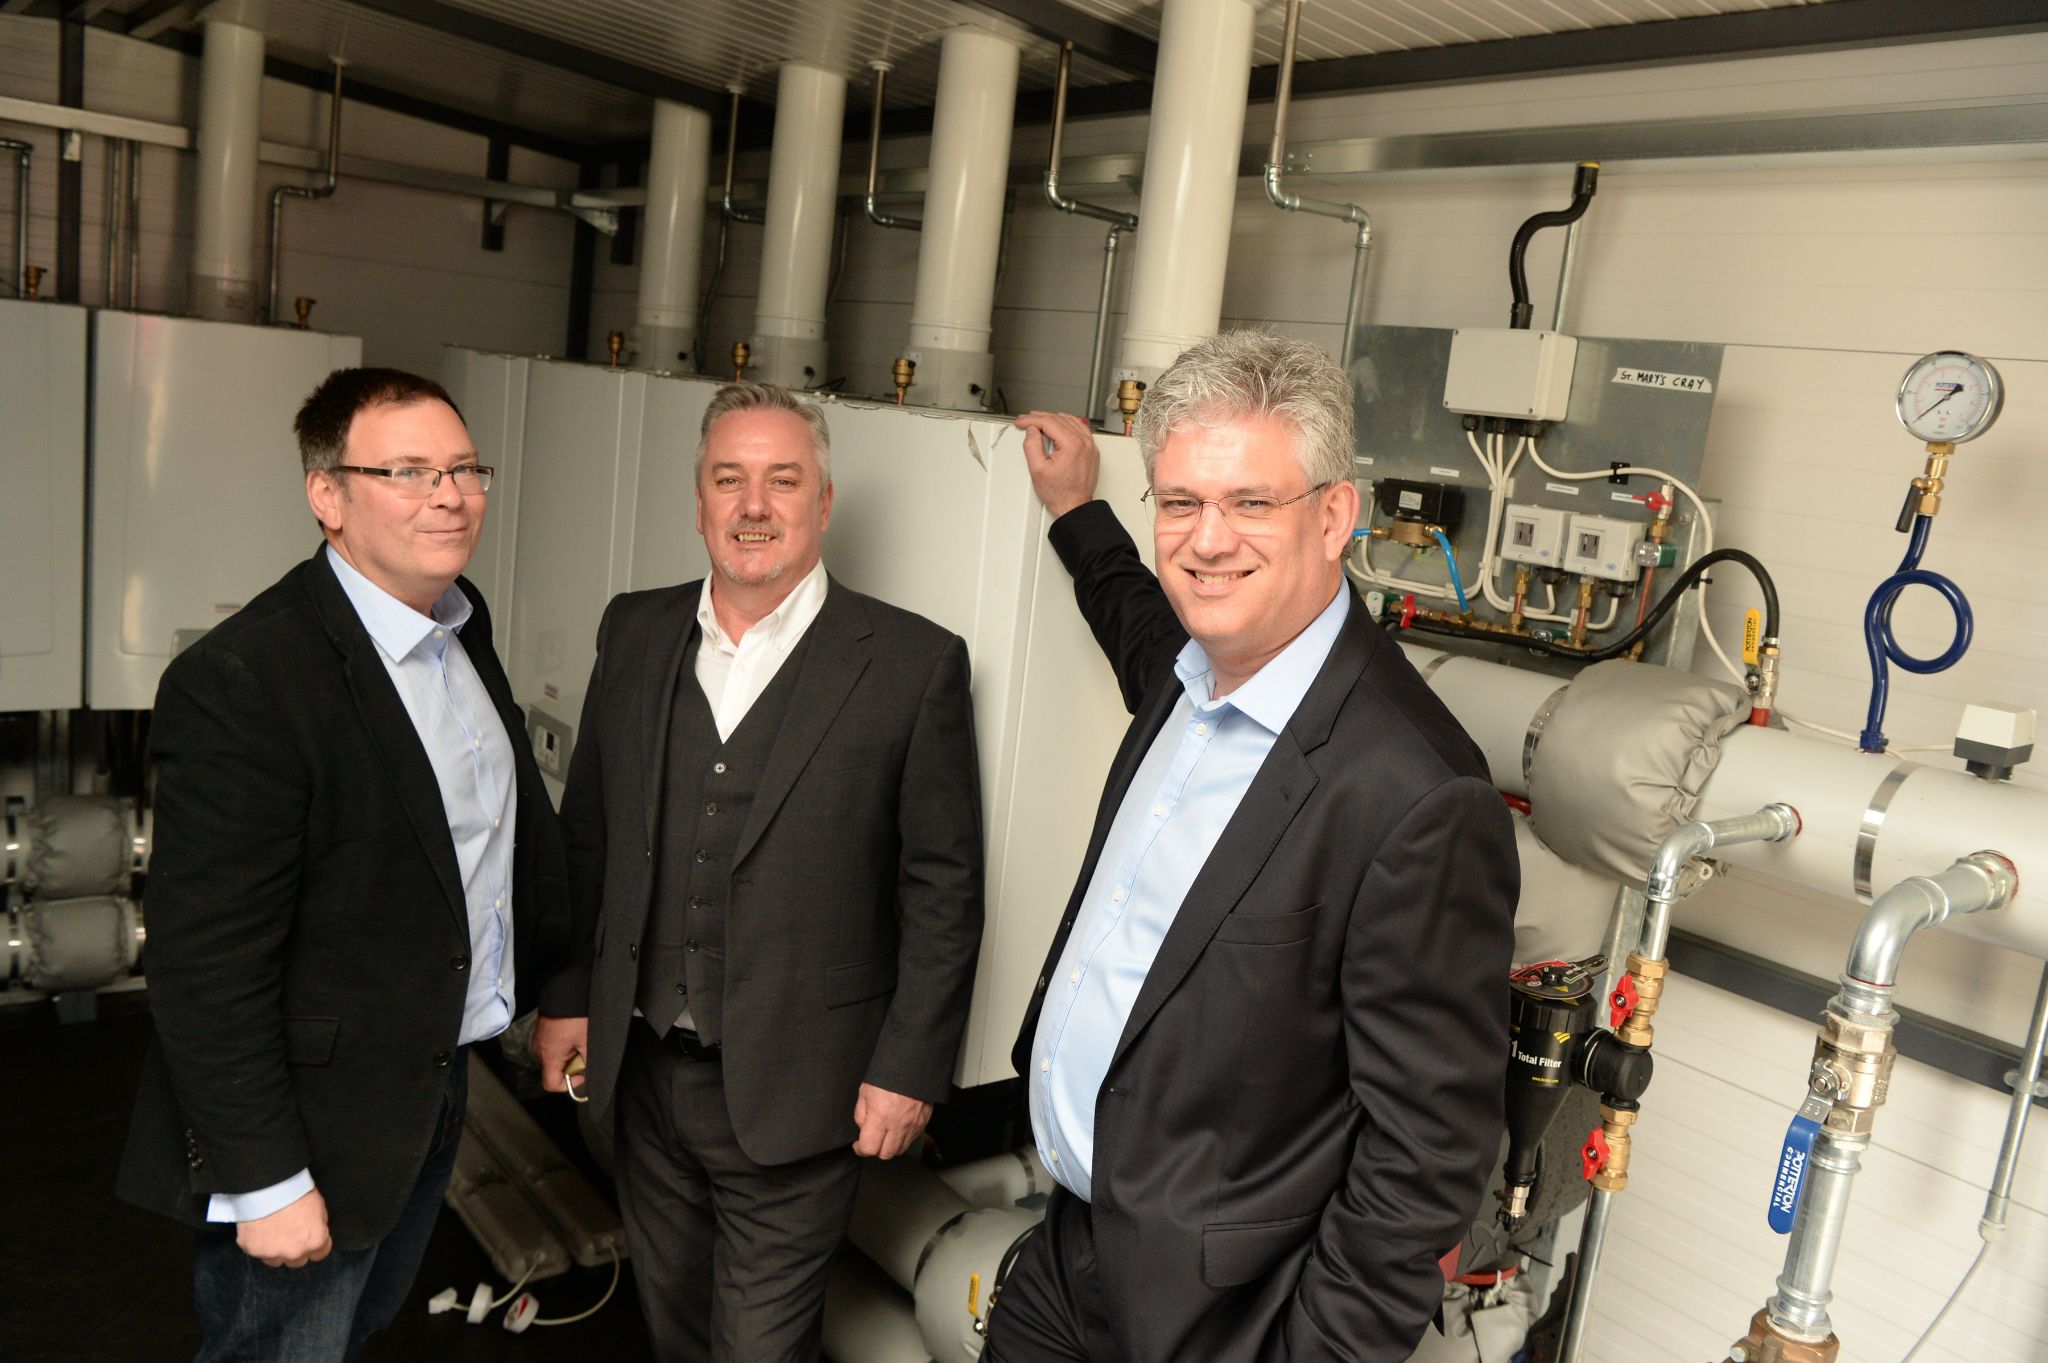 Baxi Heating acquires Packaged Plant Solutions to strengthen its packaged plant room offer